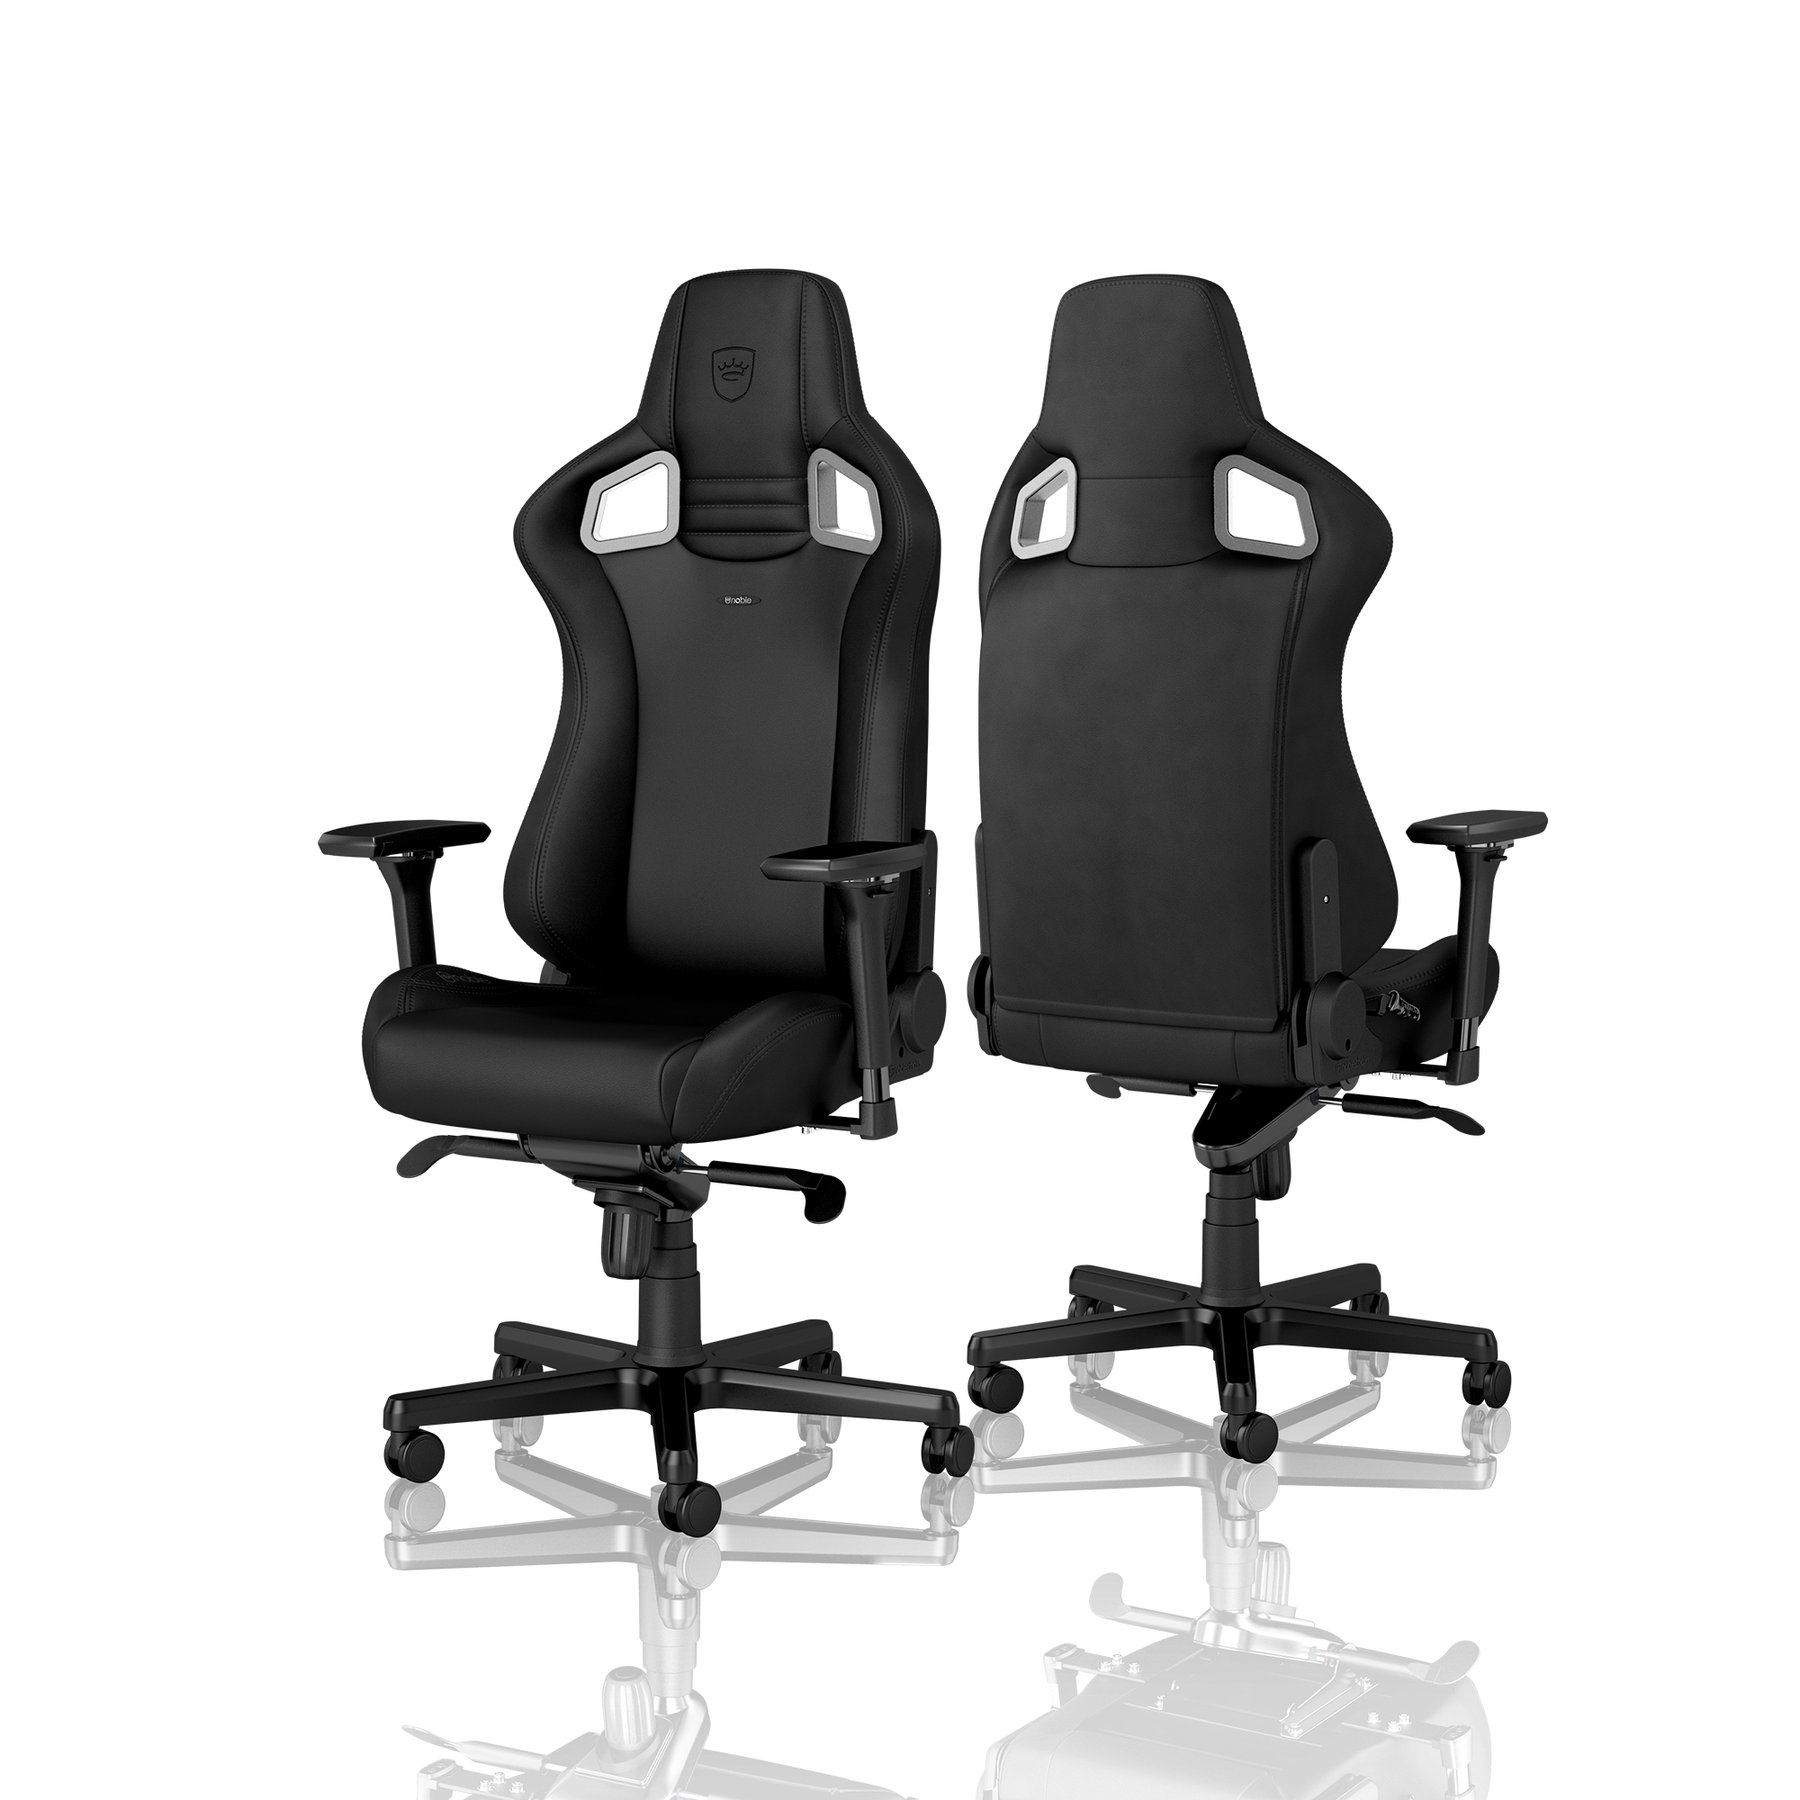 noblechairs - Cadeira noblechairs EPIC - Black Edition